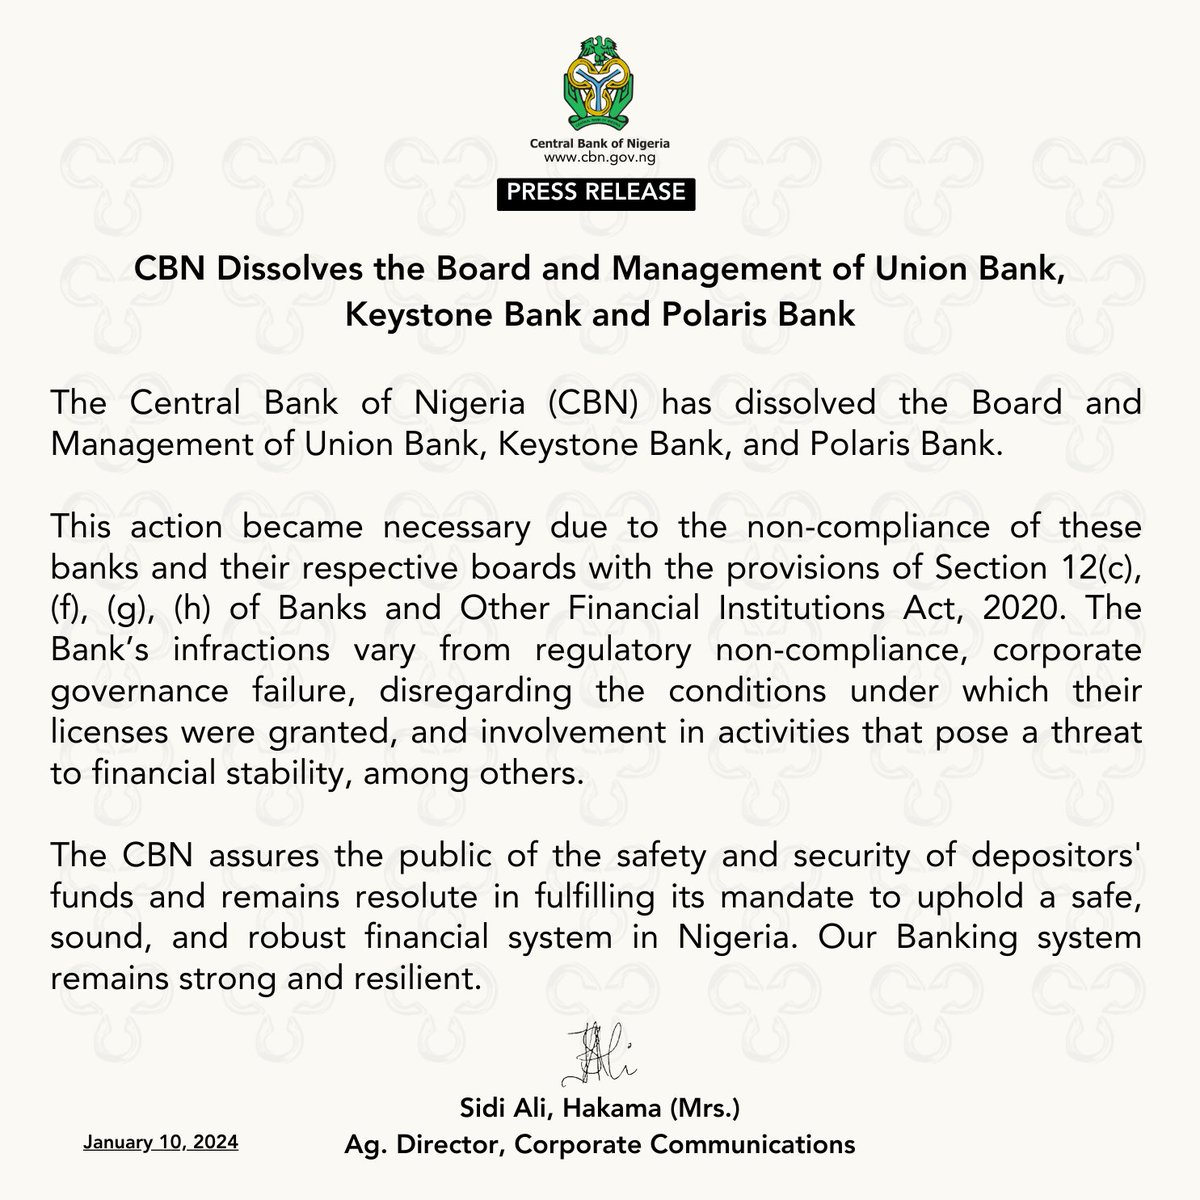 Press Release: CBN Dissolves the Board and Management of Union Bank, Keystone Bank and Polaris Bank